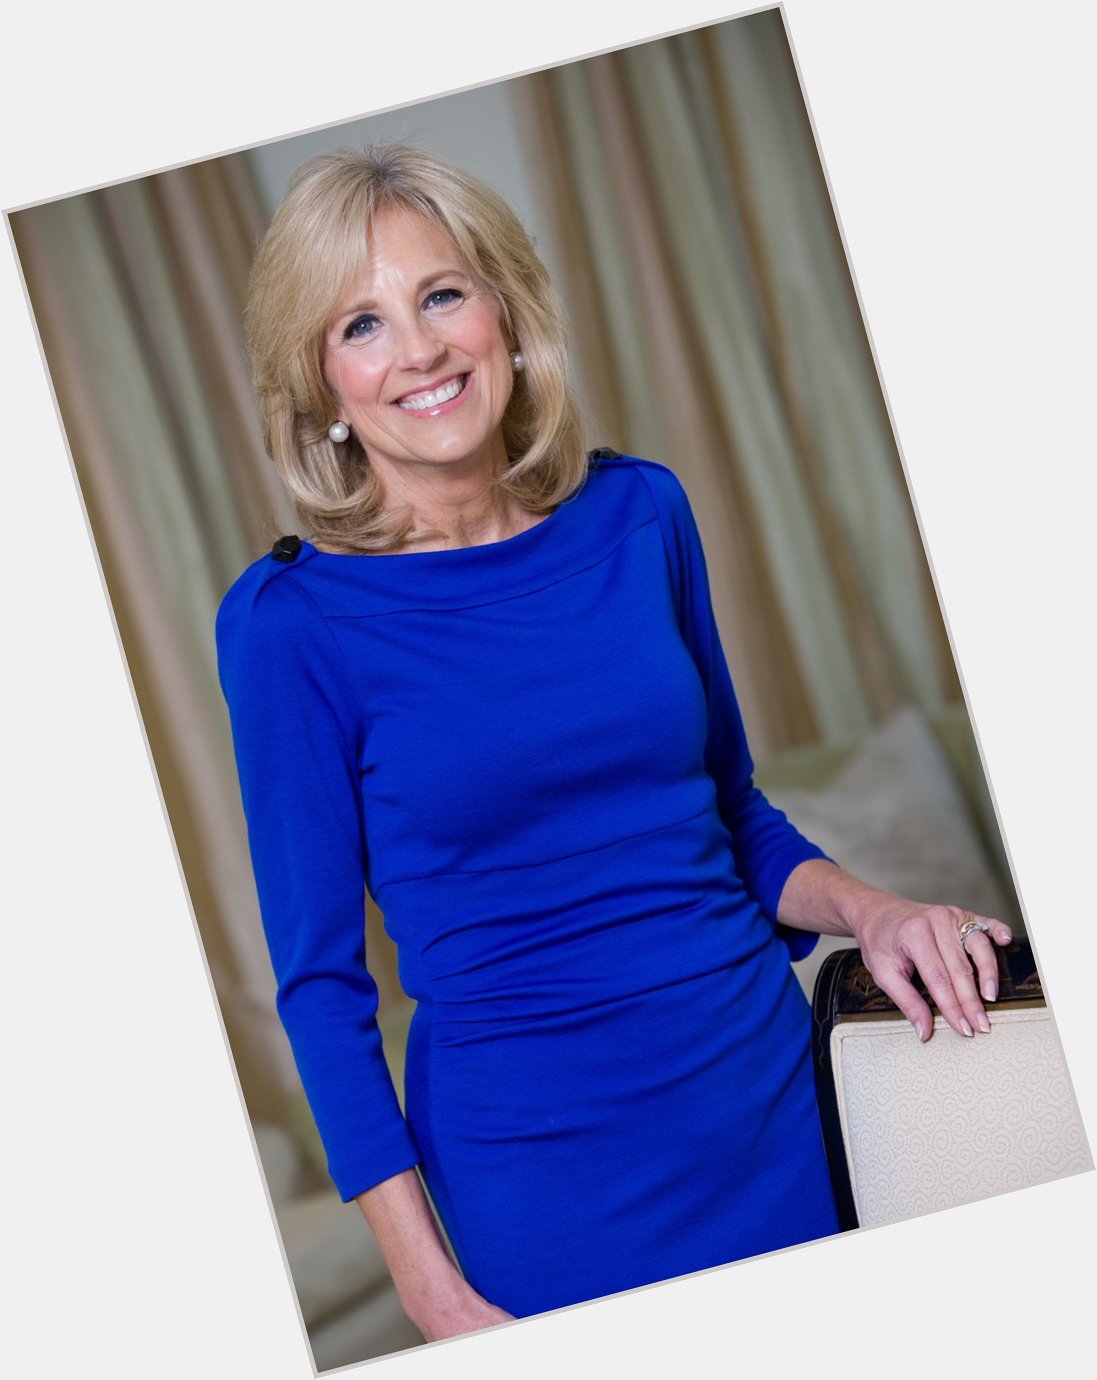 Happy Birthday to our beautiful first lady, Dr. Jill Biden 